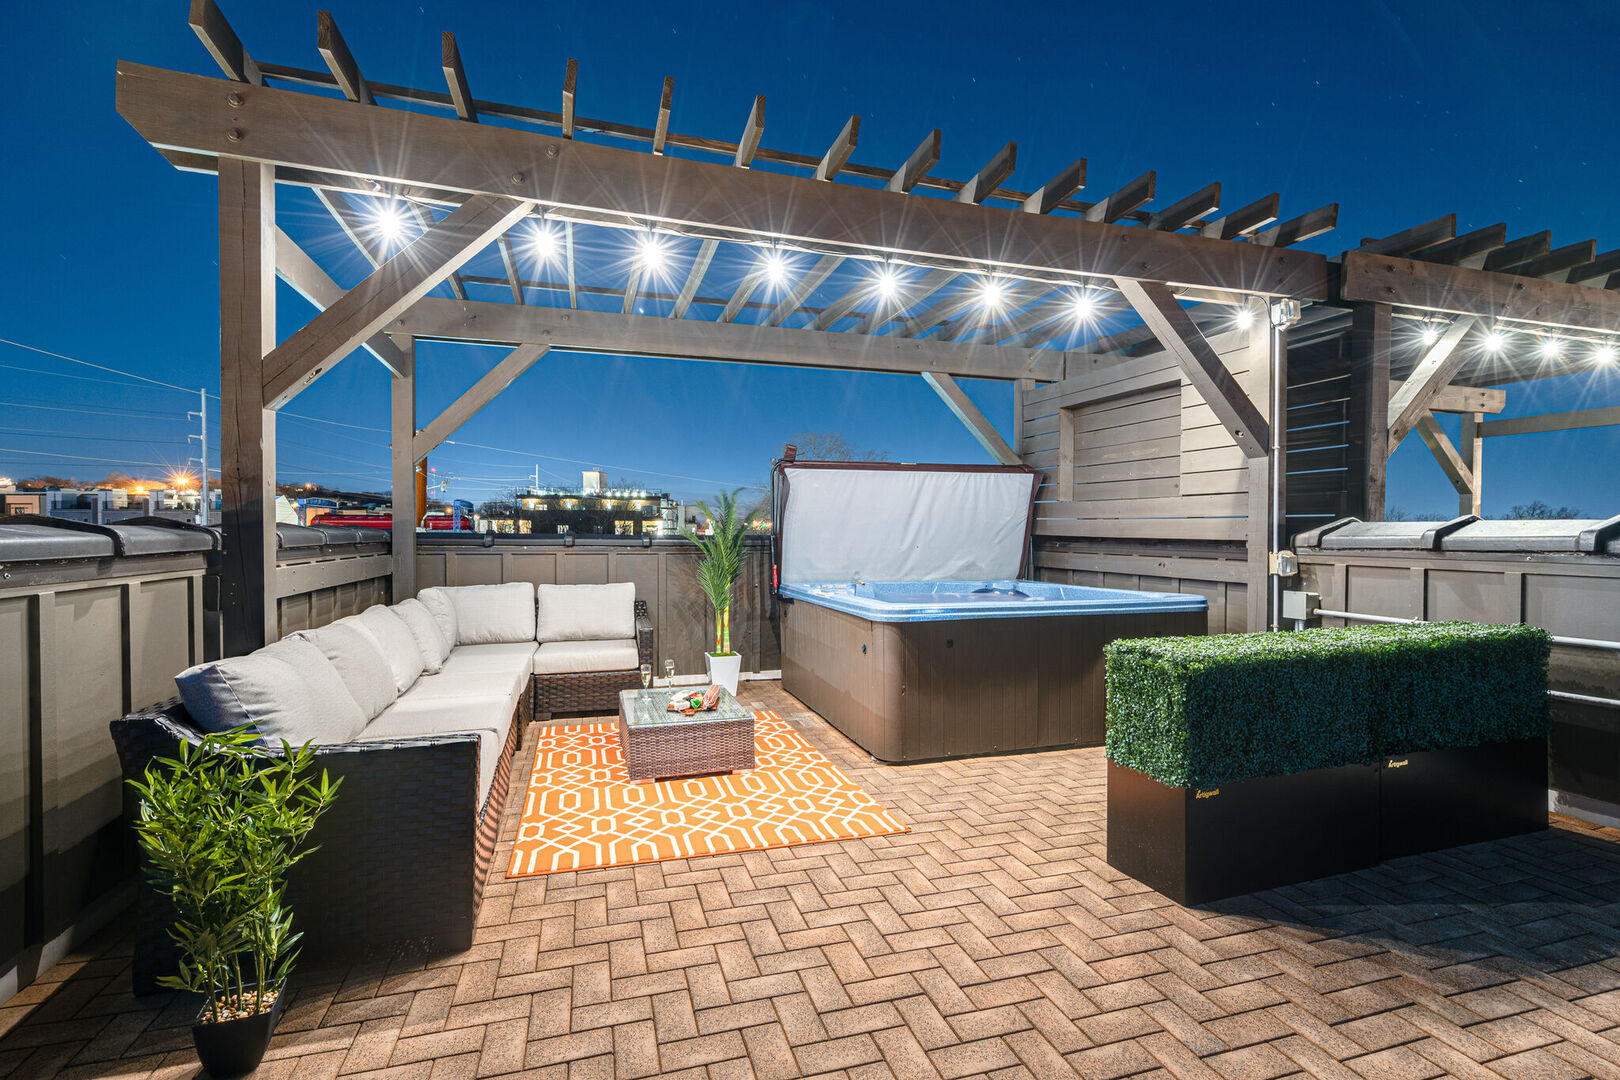 Unit 1: UPPER DECK with hot tub, lounge chairs and views